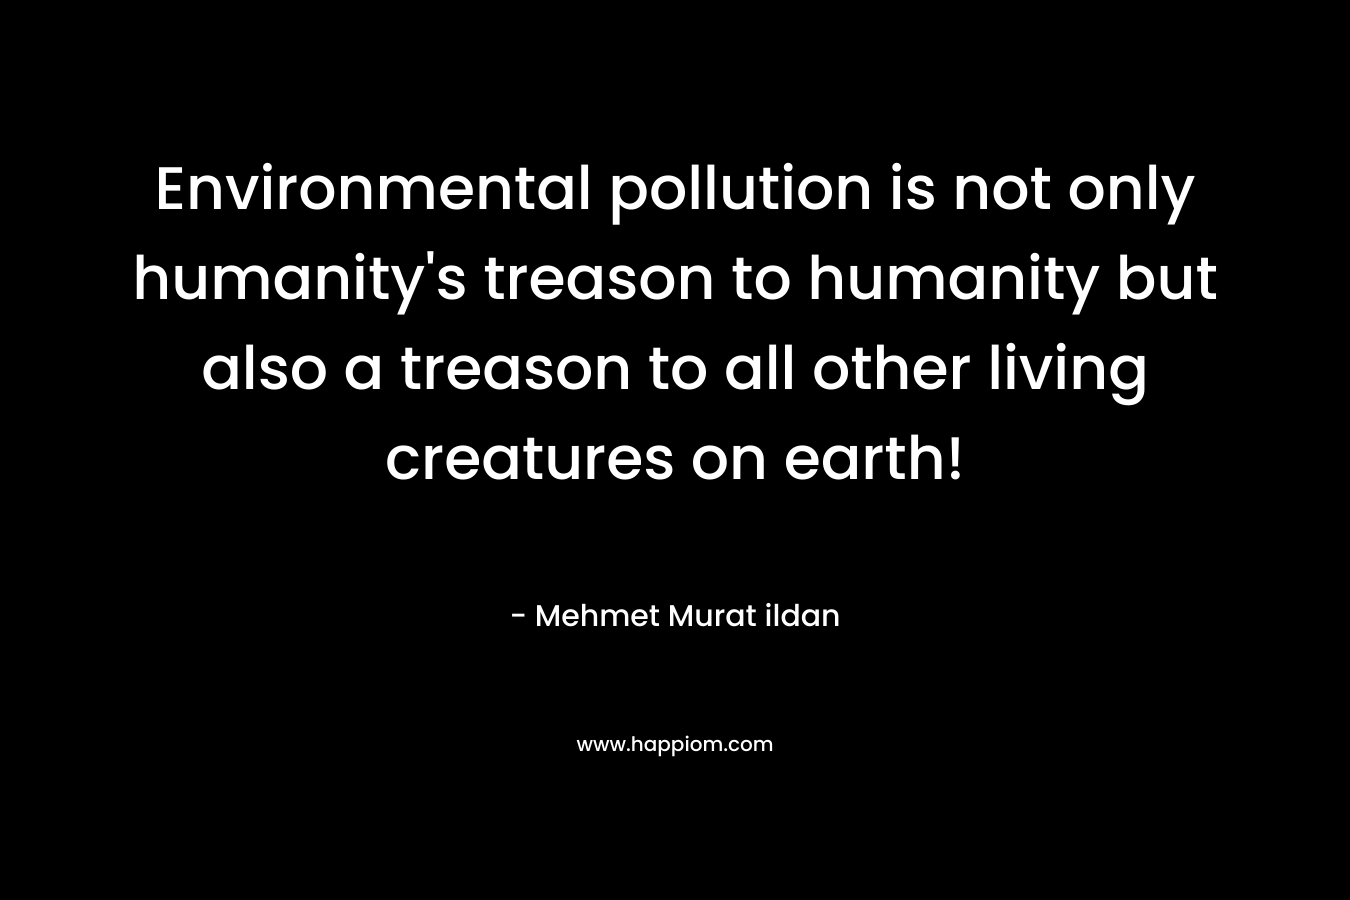 Environmental pollution is not only humanity's treason to humanity but also a treason to all other living creatures on earth!